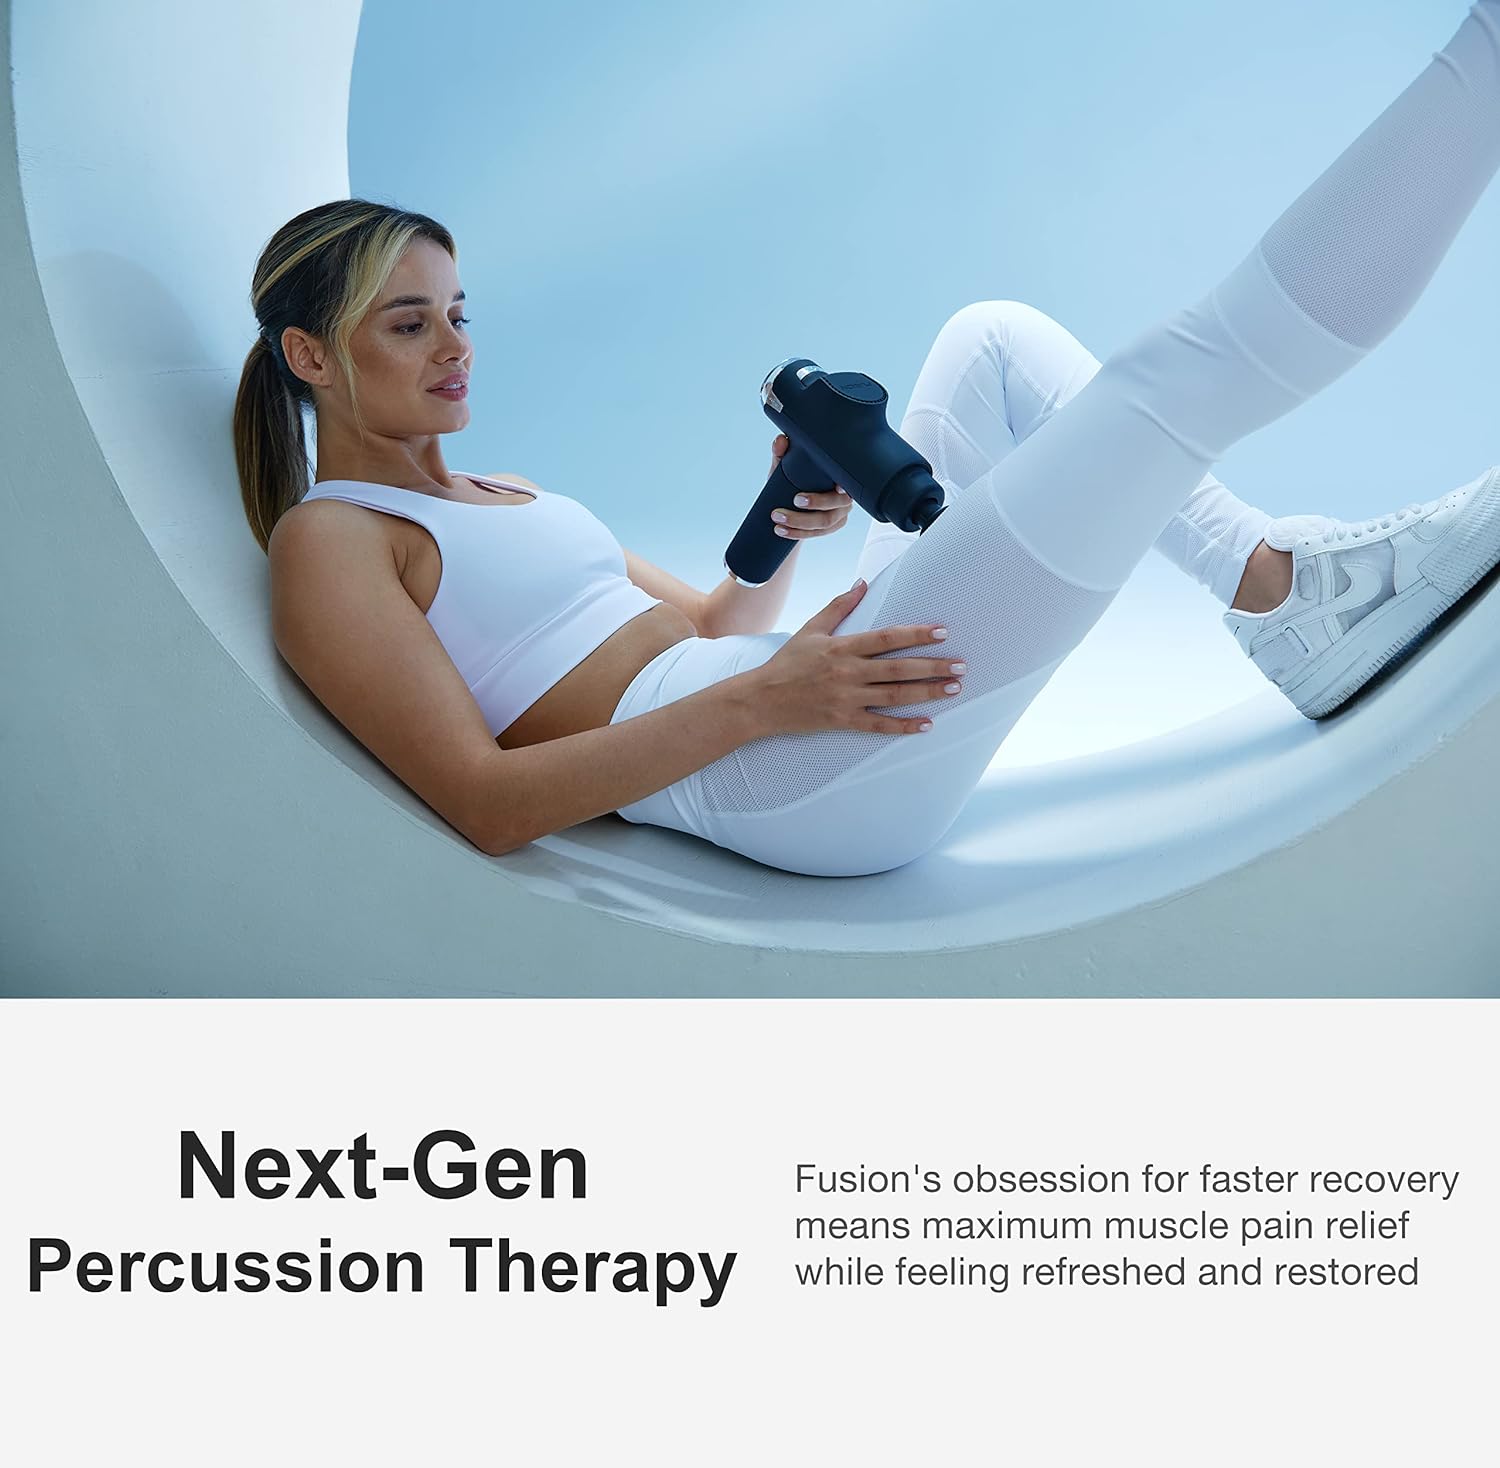 Fusion Black Pro Muscle Massage Gun Deep Tissue Percussion Muscle Massager Gun for Athletes Pain Relief Therapy and Relaxation, Percussive Chiropractor Massager, Body Massager